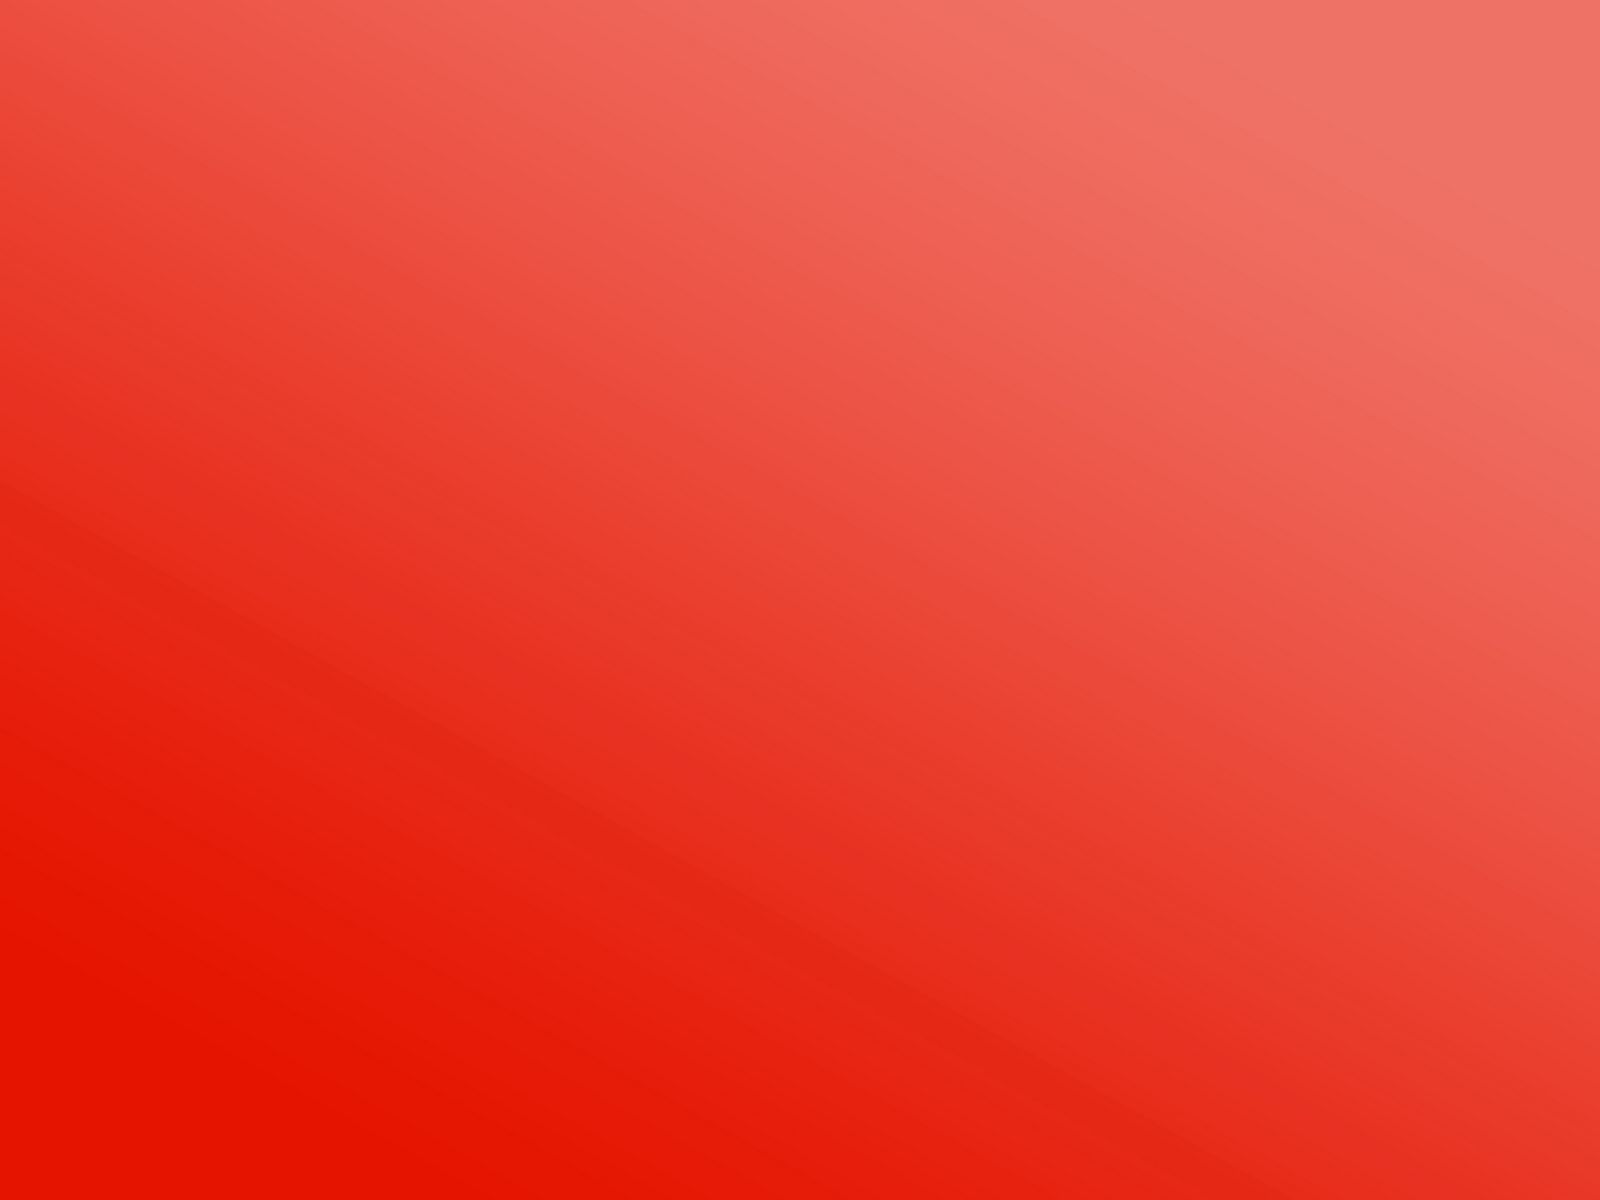 Download wallpaper 1600x1200 red, solid, light, bright, scarlet standard  4:3 hd background